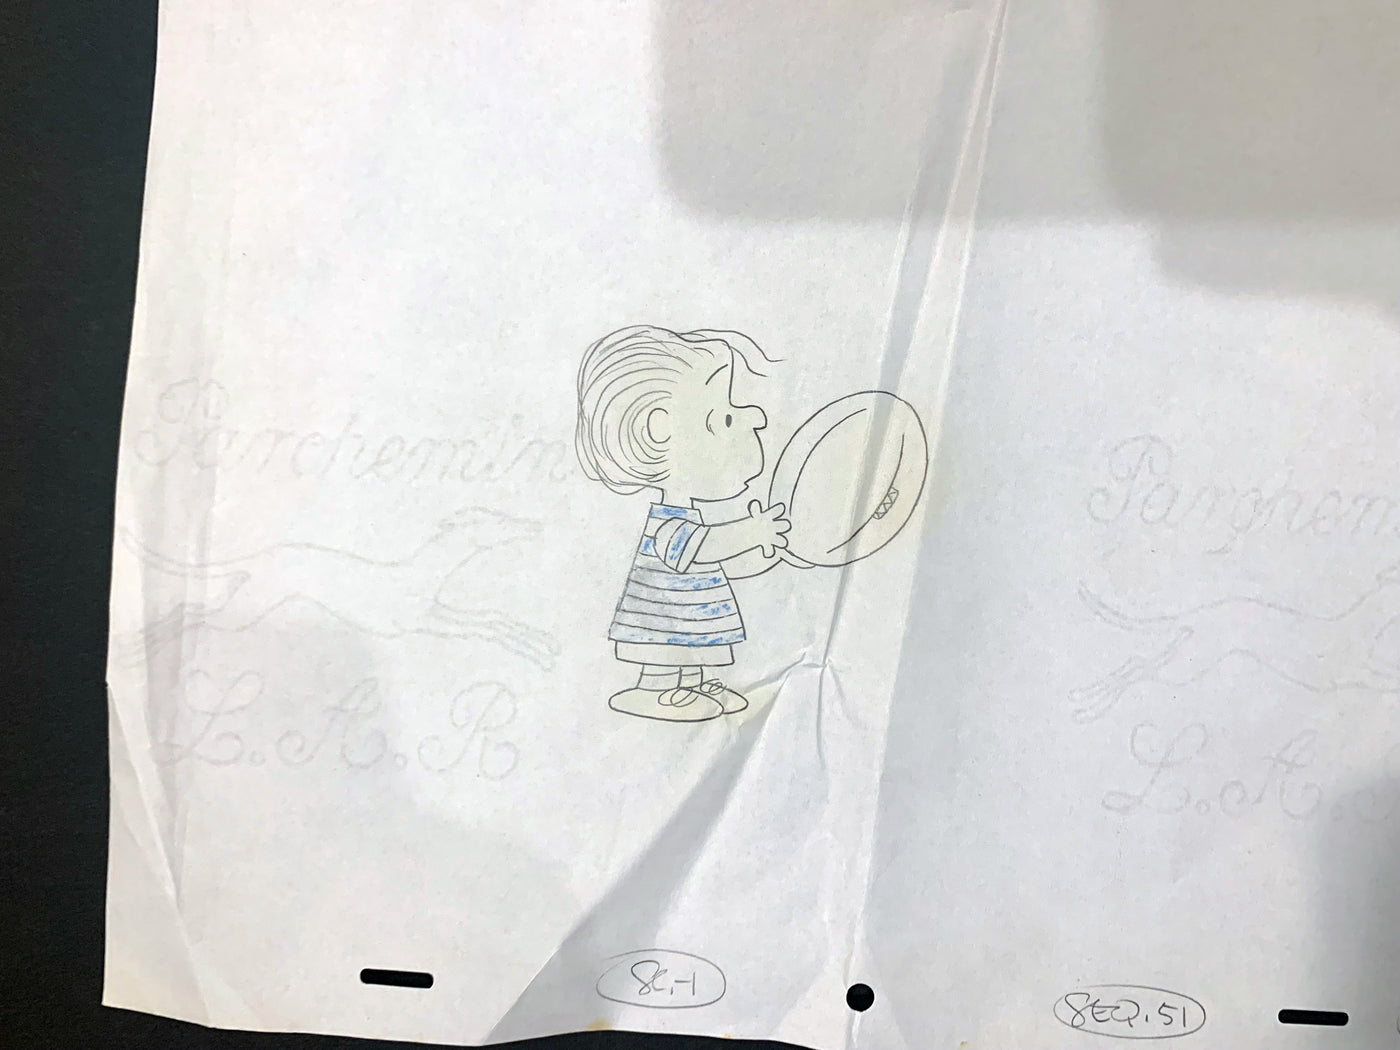 Original Peanuts Production Cel and Matching Production Drawing from The Charlie Brown and Snoopy Show featuring Linus